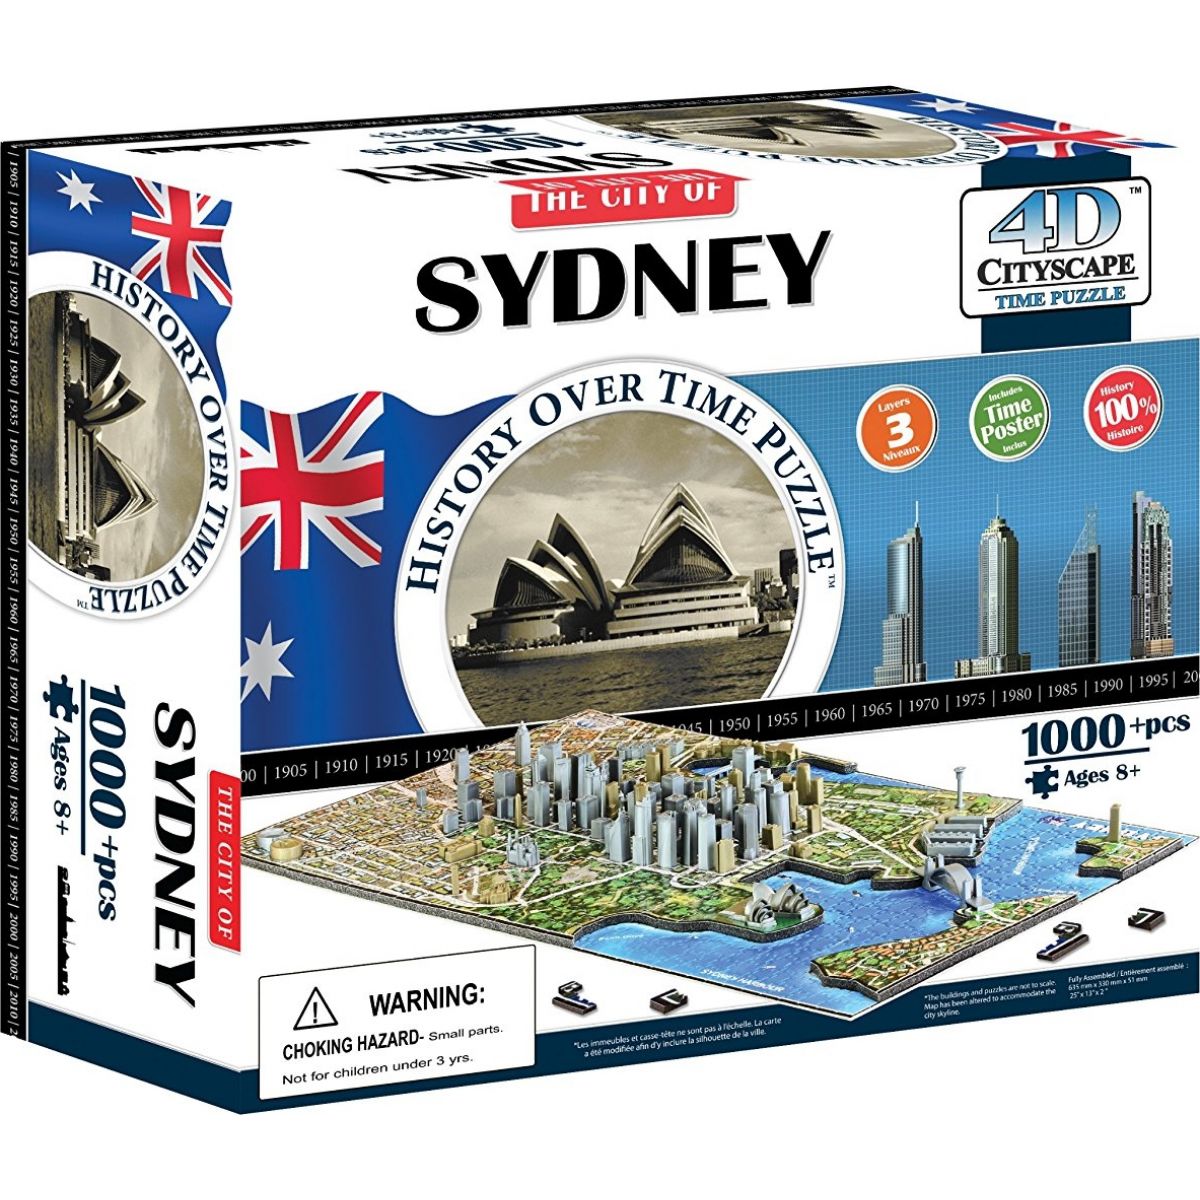 4D Cityscape puzzle Time Panorama Sydney